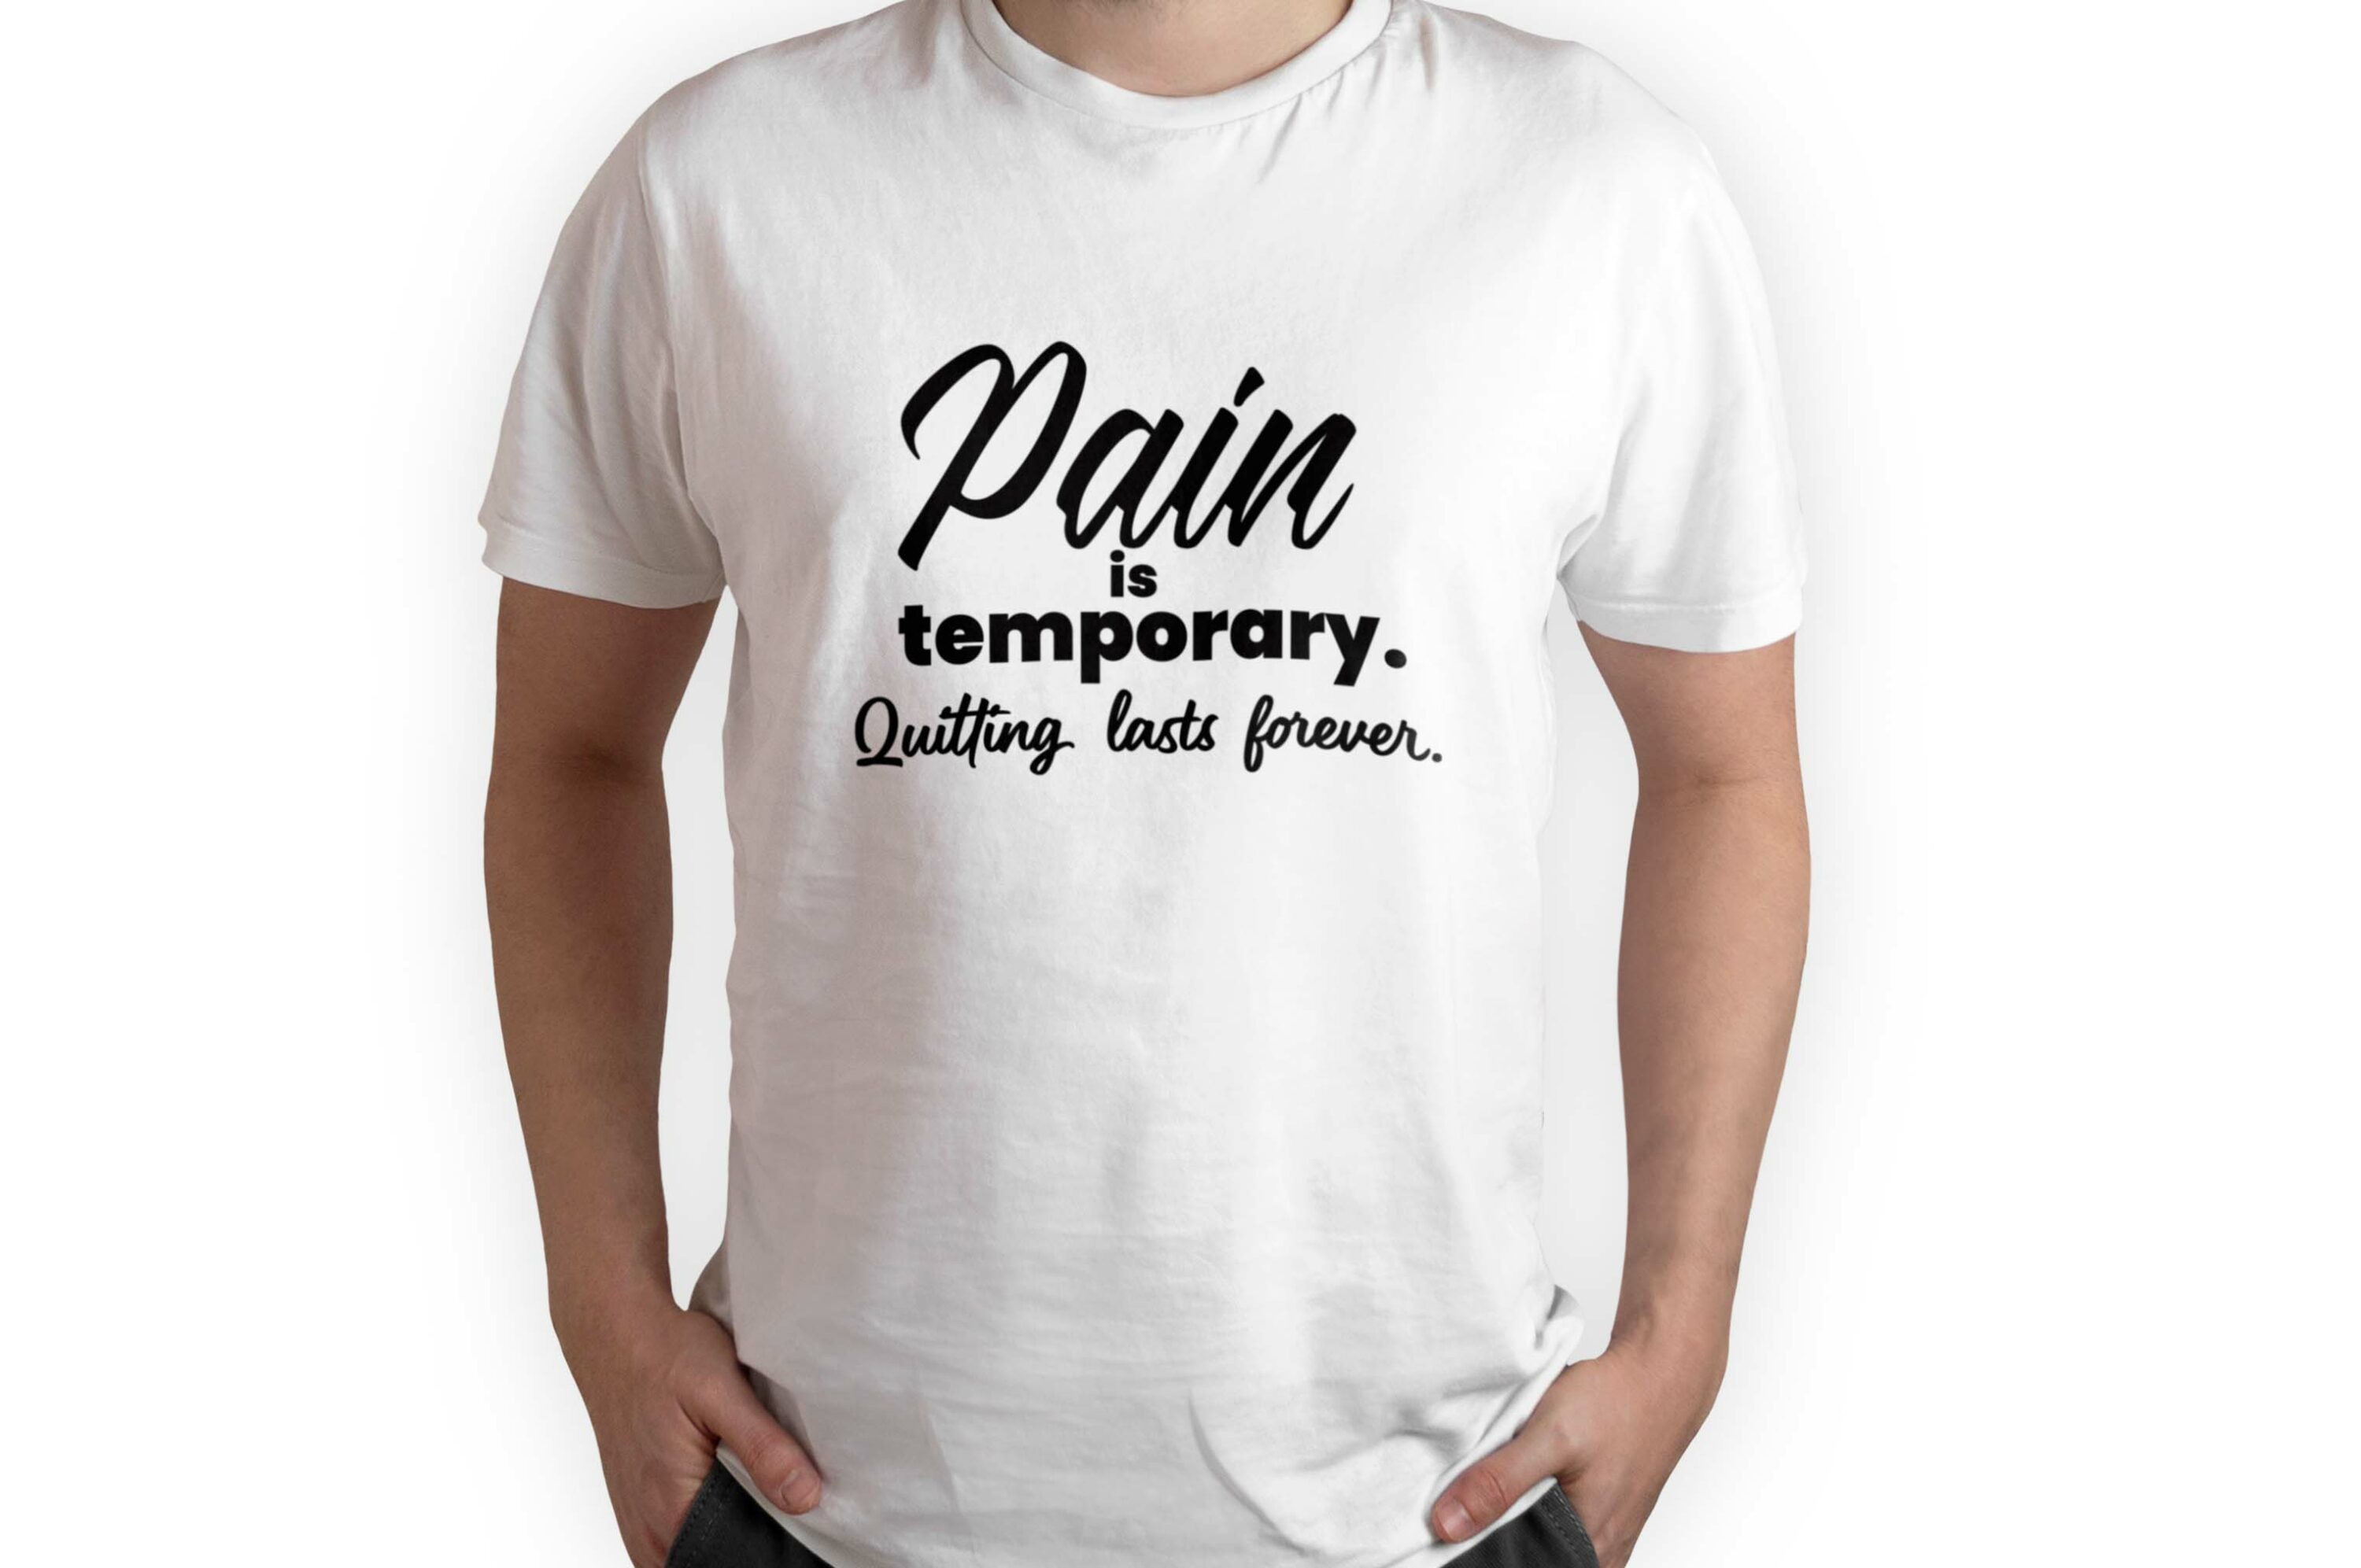 Bundle of 156 T-shirt Designs with Fitness Quotes, pain is temporary.